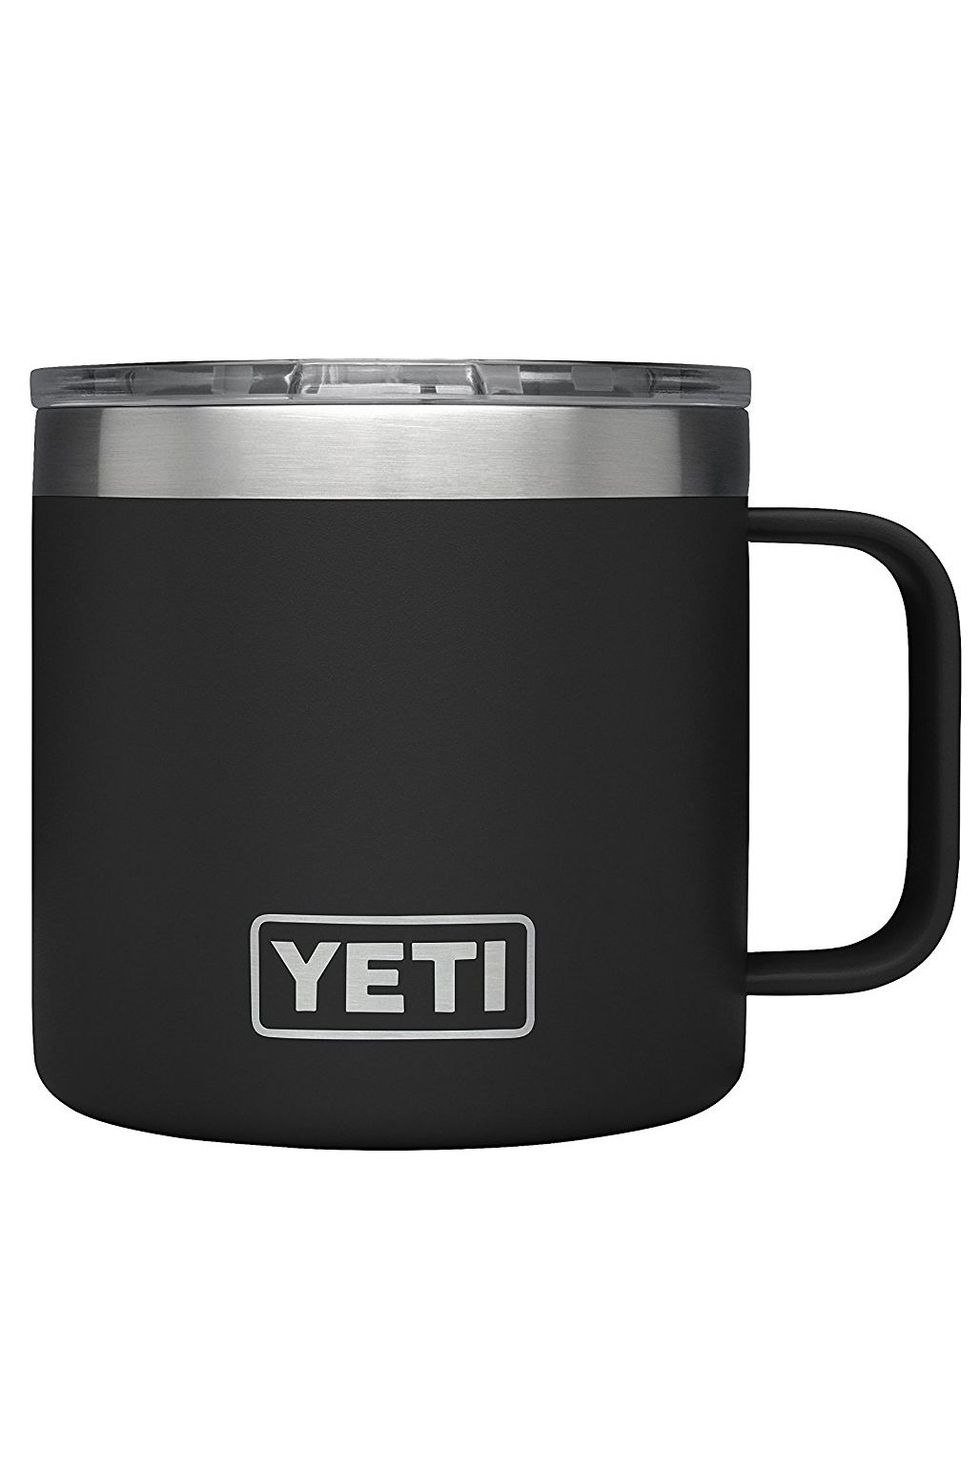 Keep Your Hot Drinks Hot and Cold Drinks Cold With Up to 38% Off Stanley  Mugs - CNET